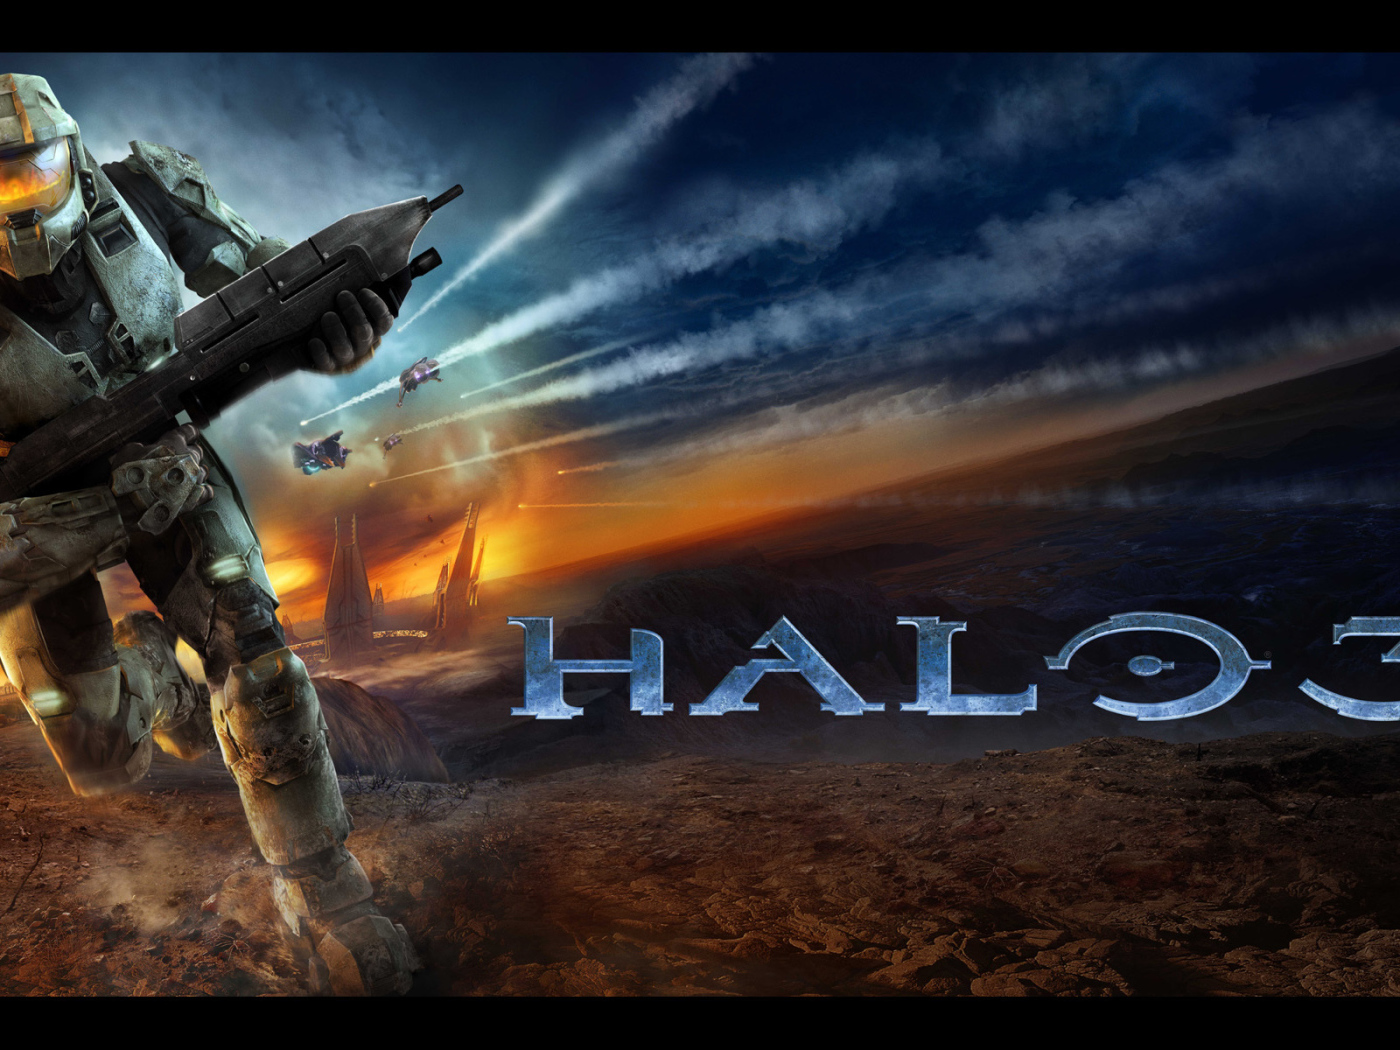 Video game Halo 3